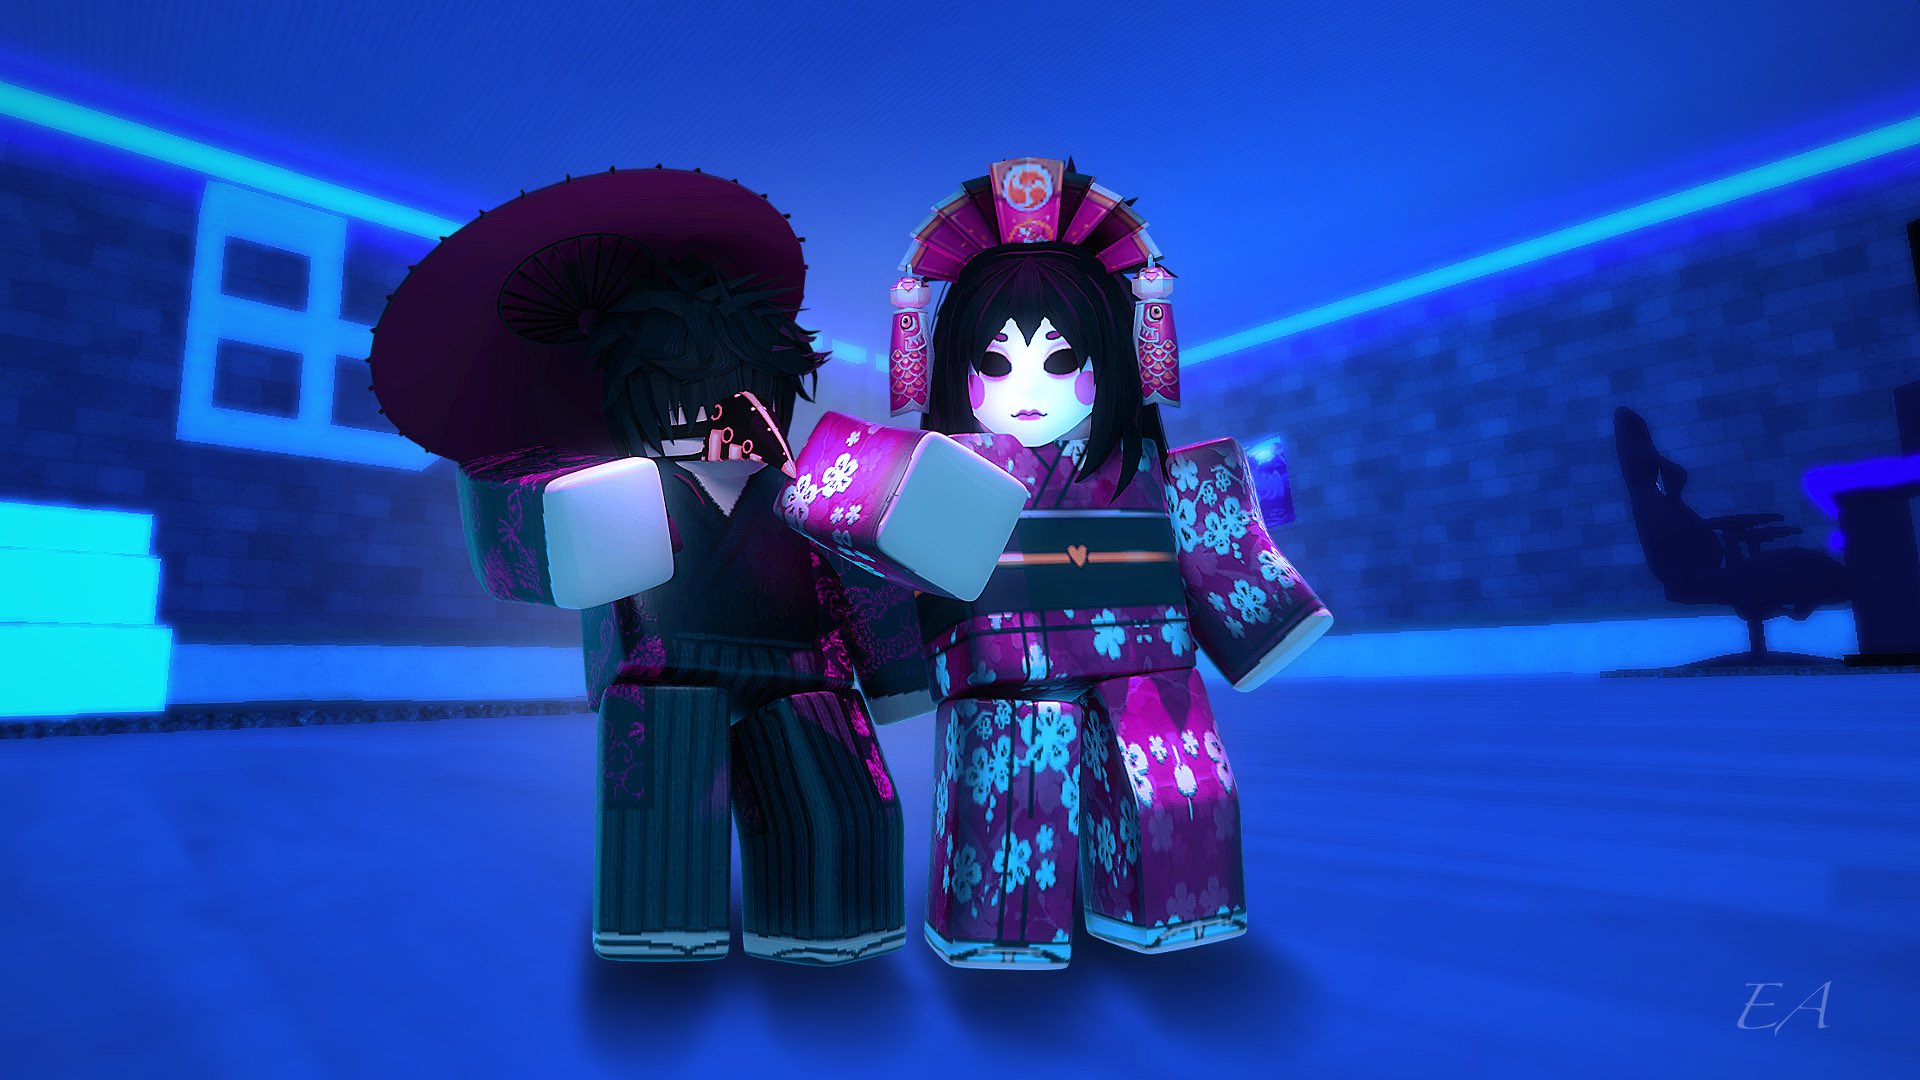 SeriousBW on X: Kaigaku and Zenitsu GFX Icon - Commissioned by Demonfall -  Discord Link:  - #robloxart #roblox #robloxgfx  #robloxdev #robloxart - Likes and Retweets are Gladly Appreciated!   / X